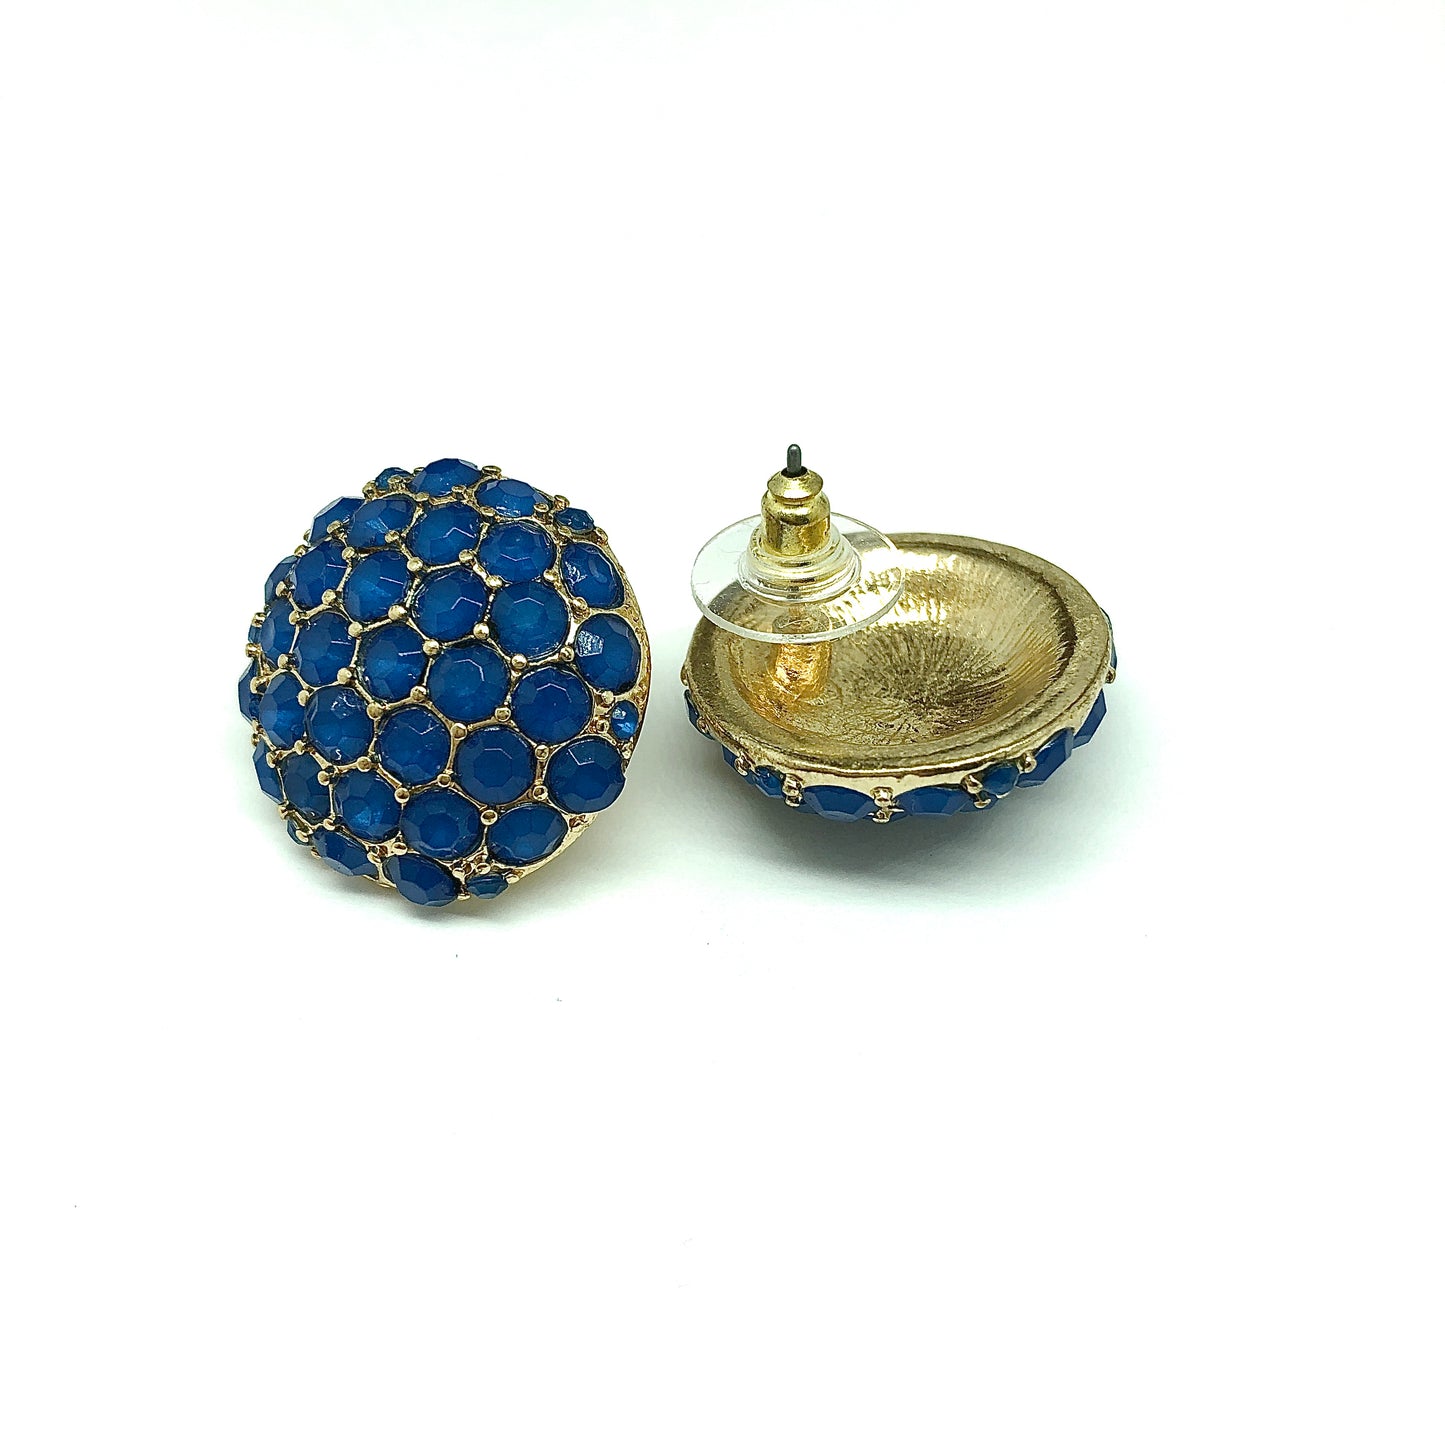 Blingschlingers - Beautiful Blue Gold Honeycomb Dome Design Button Style Earrings